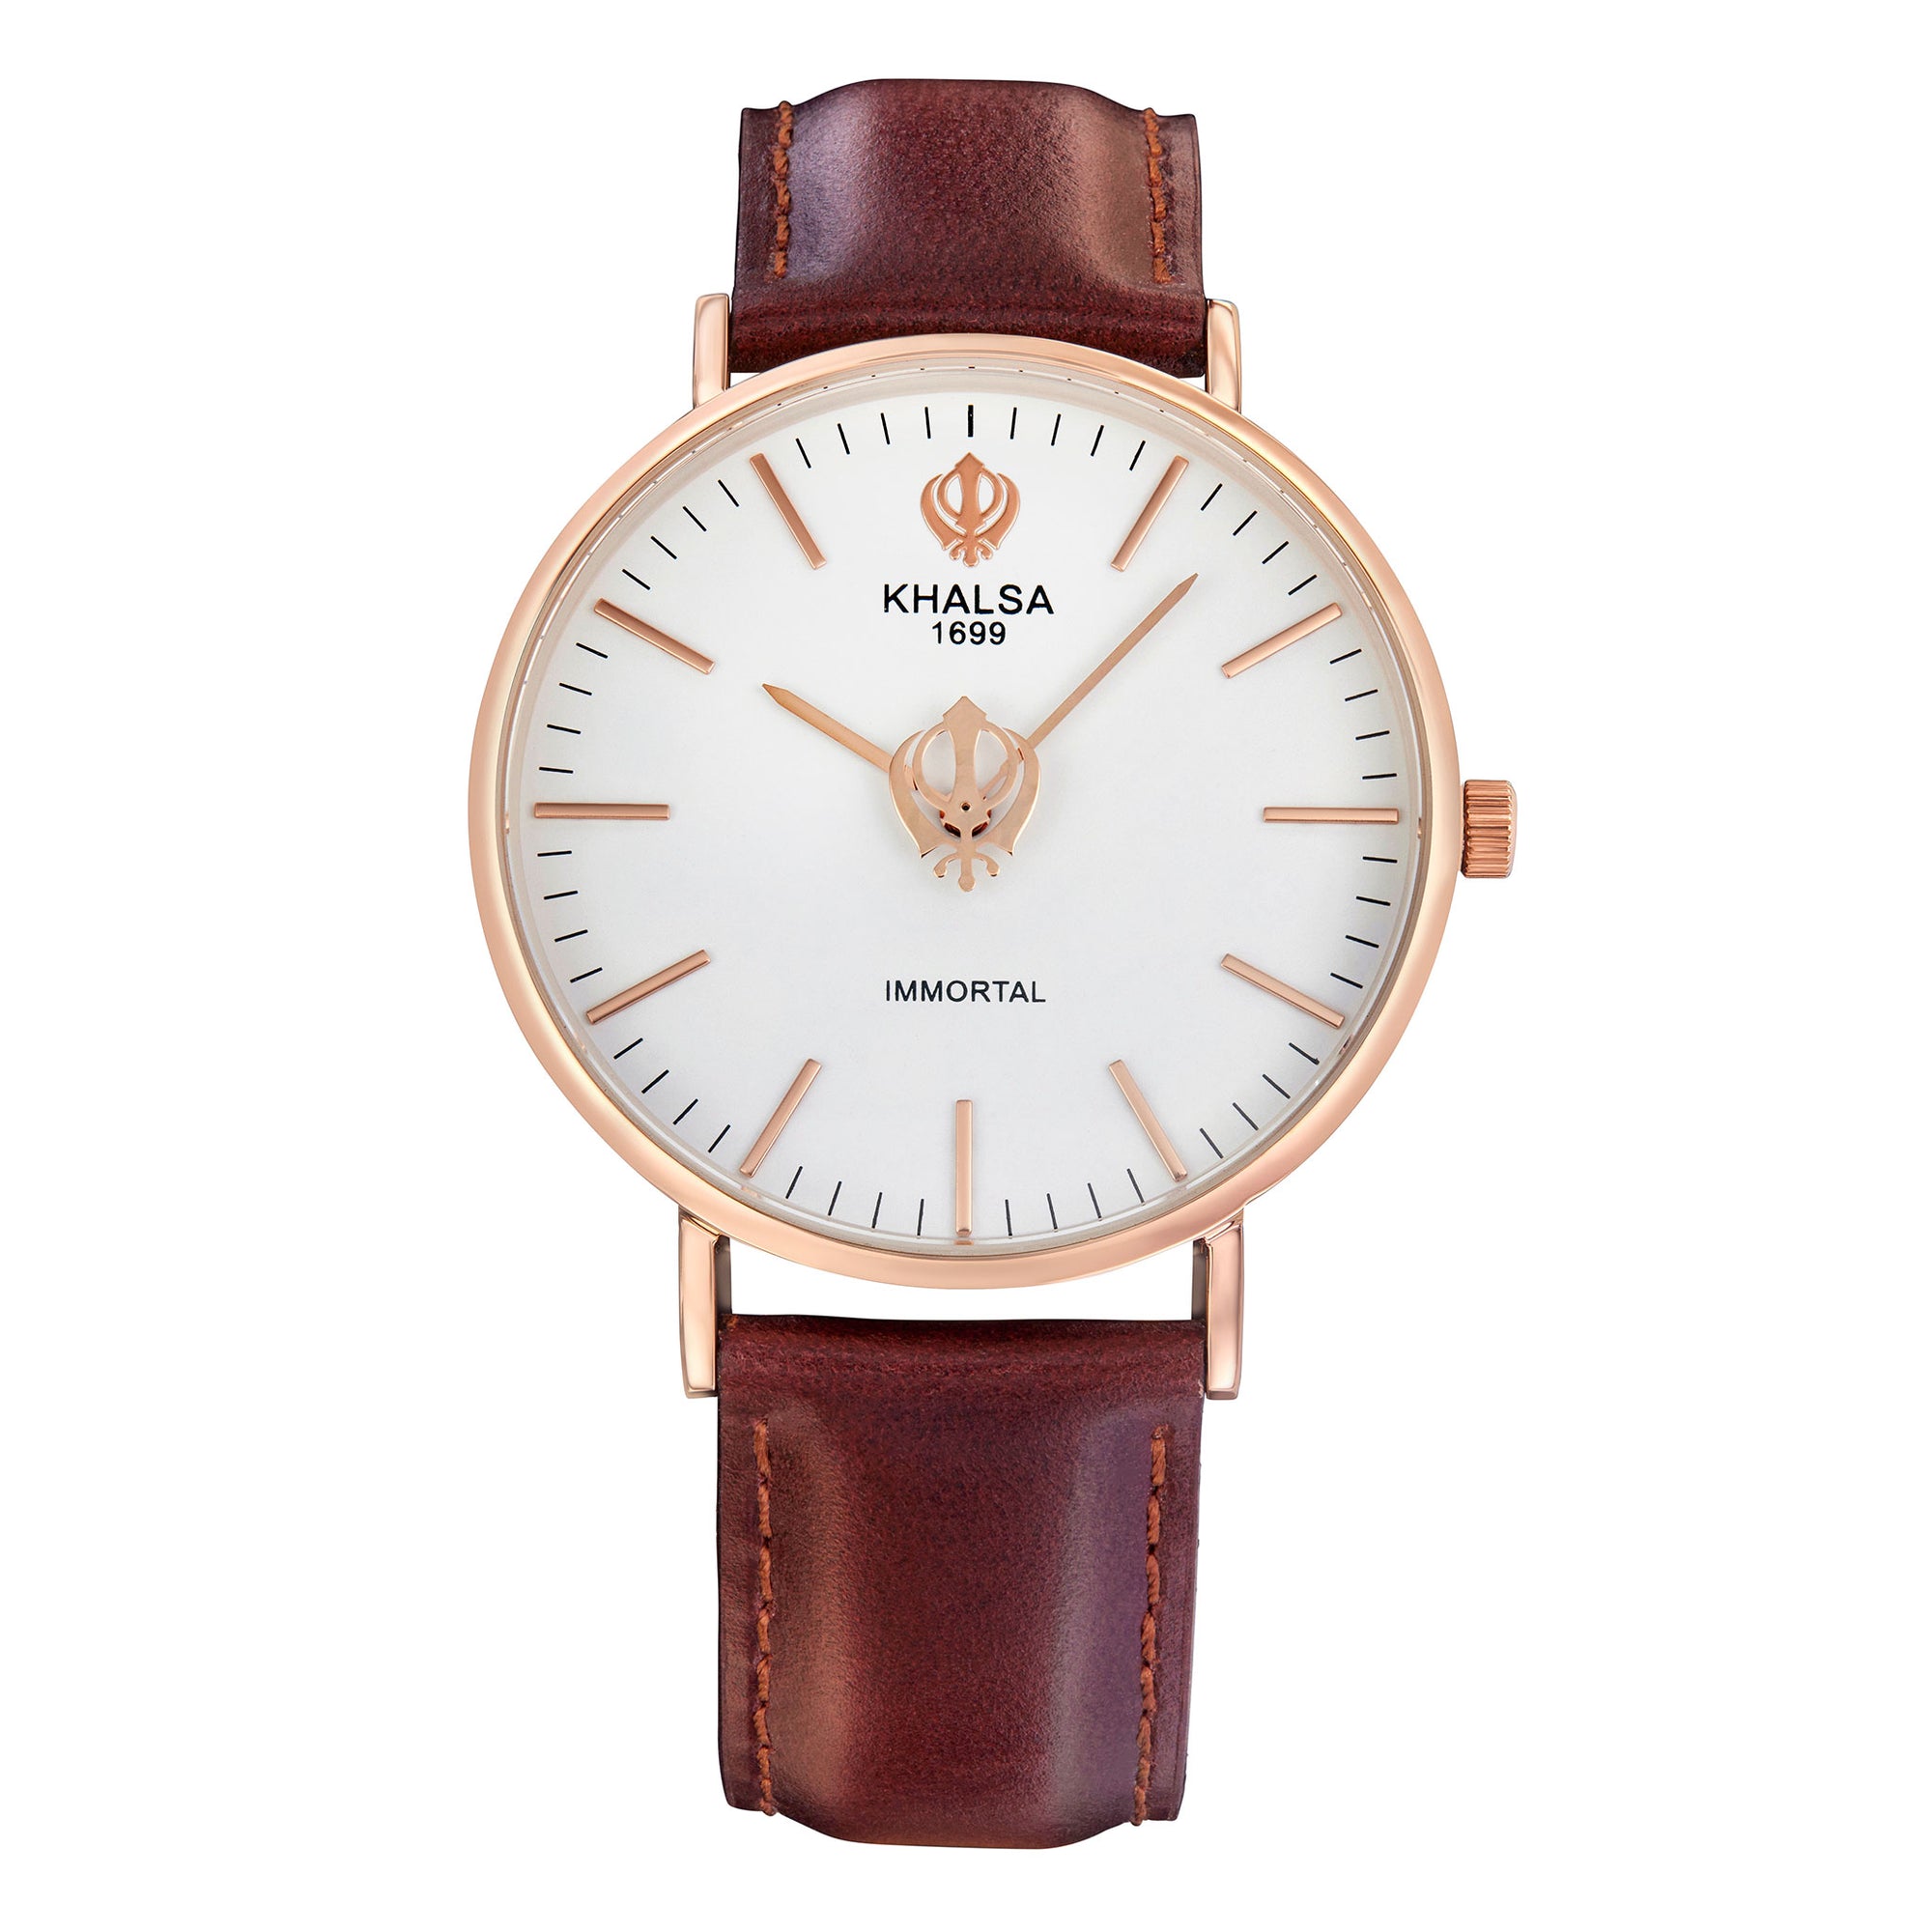 House of Khalsa IMMORTAL Gold White Sikh Watch with Khanda Symbol, Sun Dial and Brown Leather Strap - Elegant and Stylish